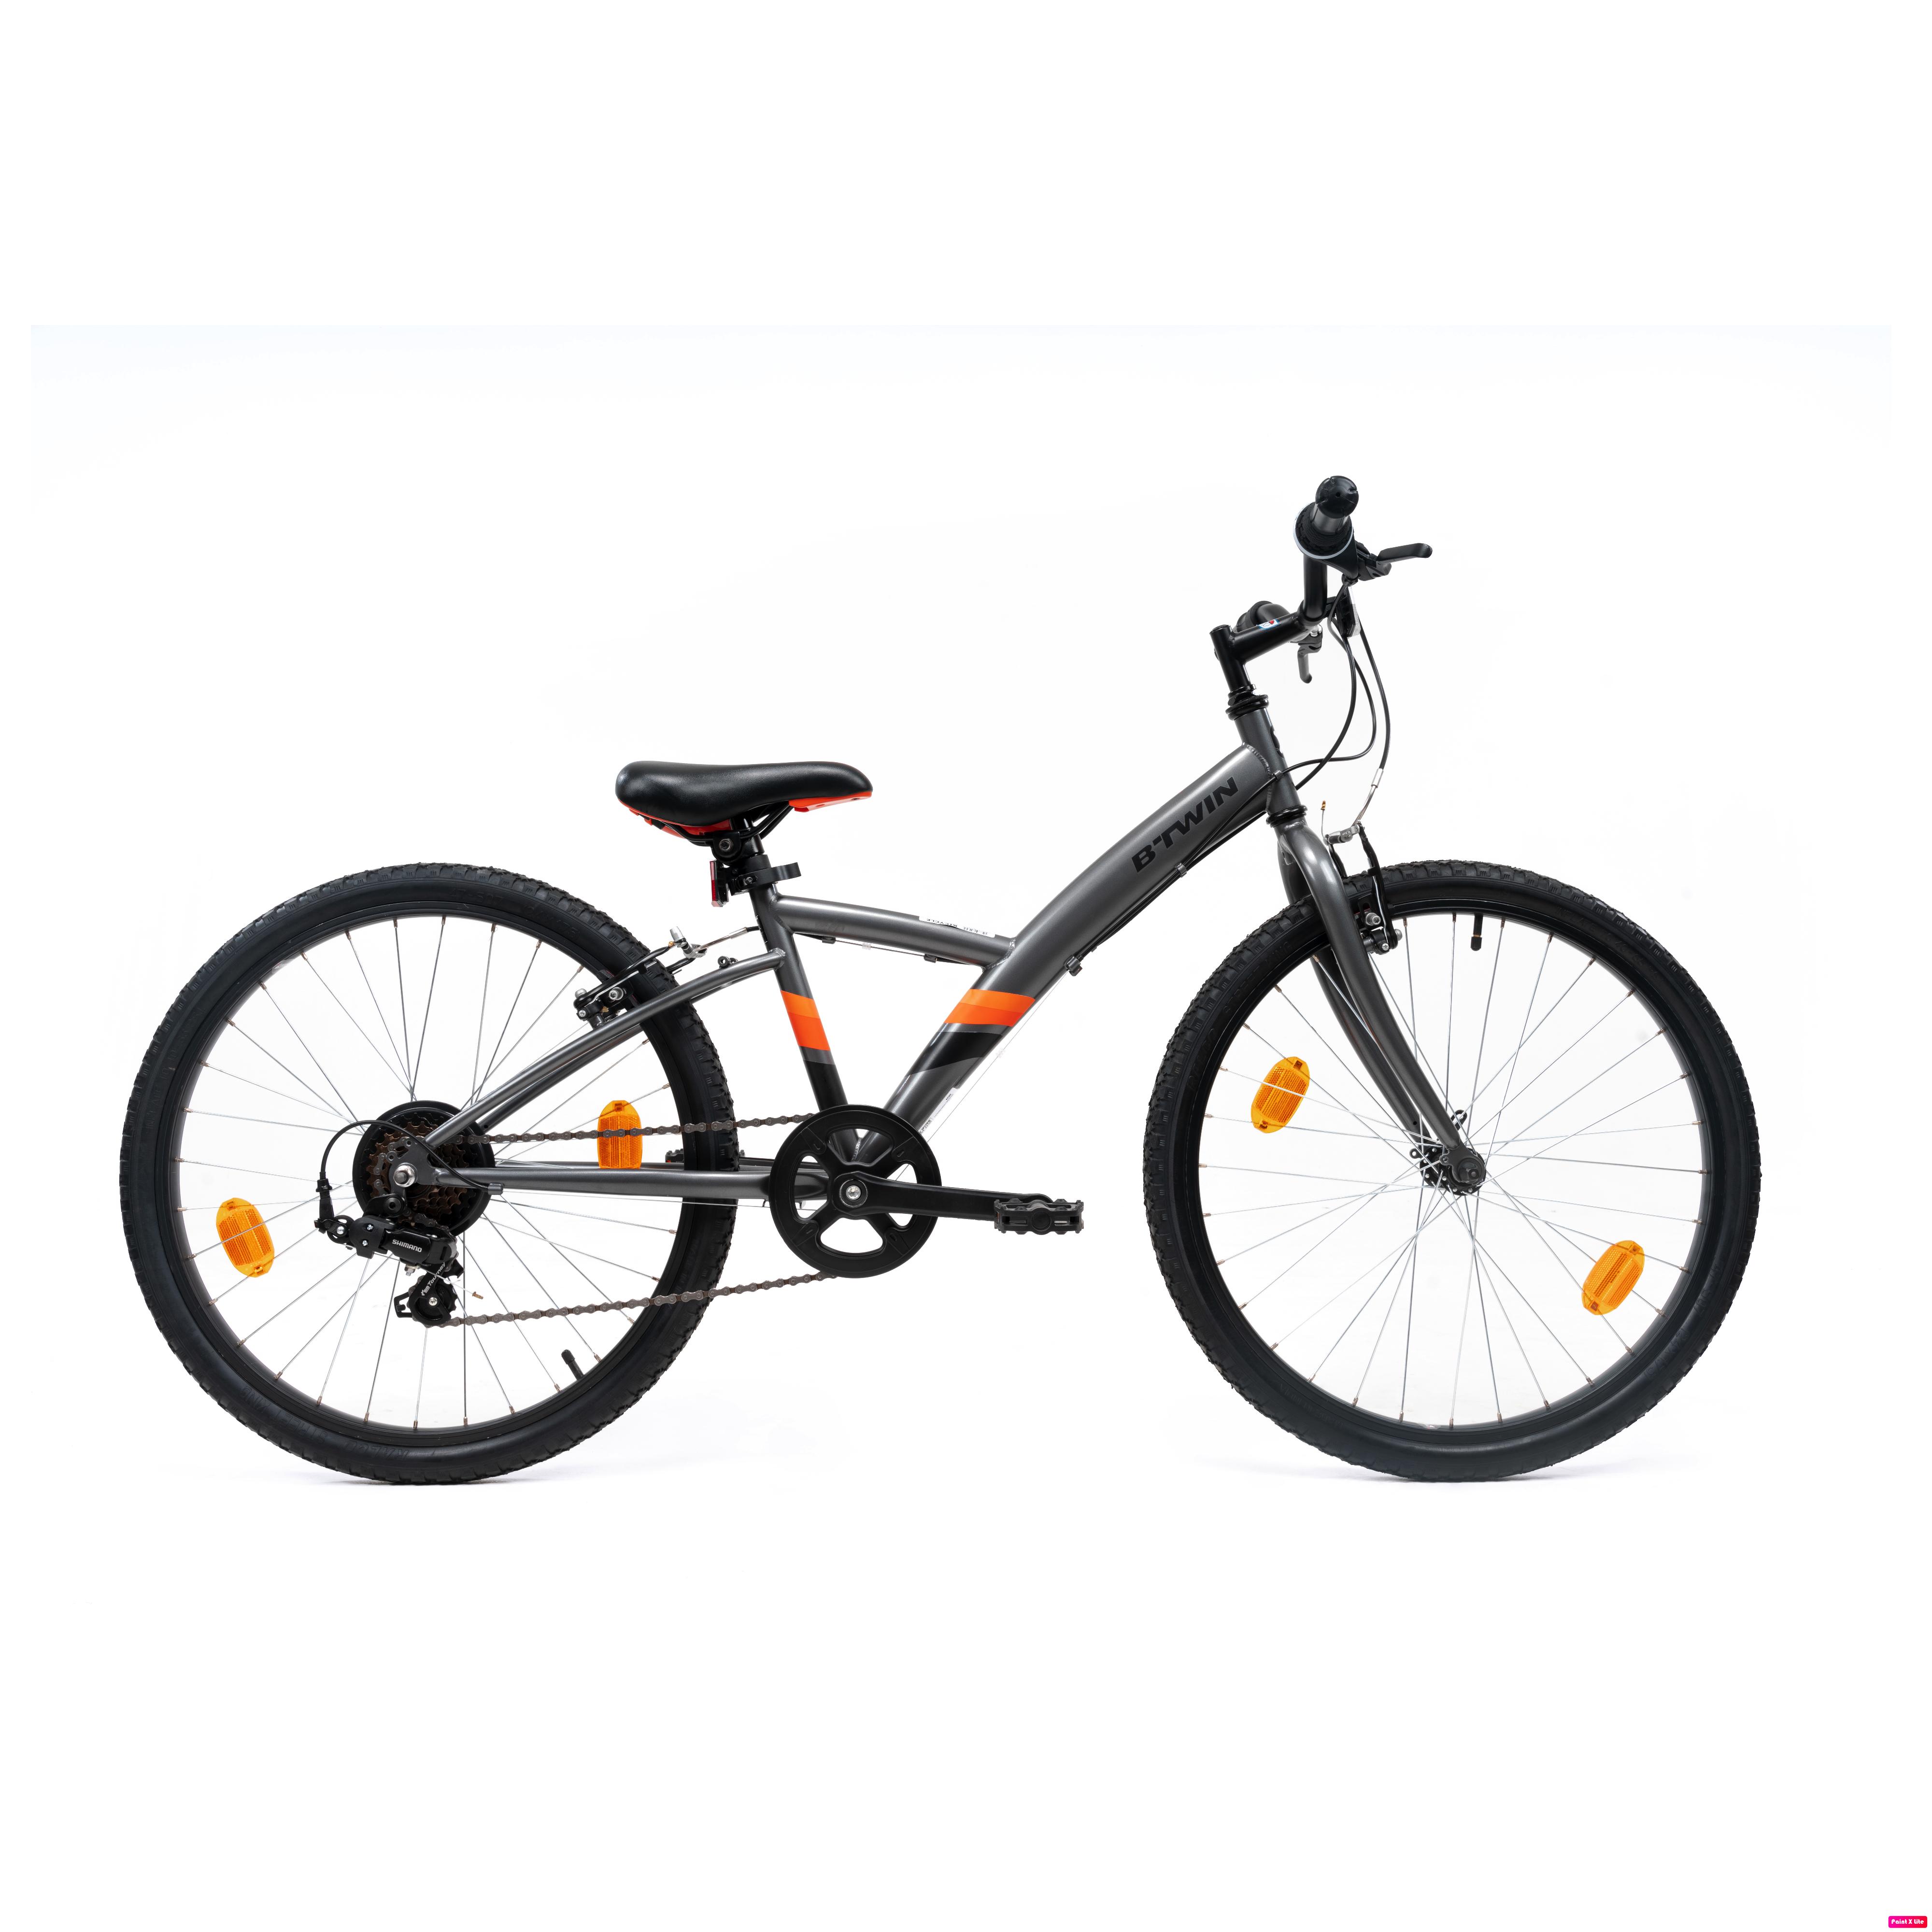 decathlon cycle for kids